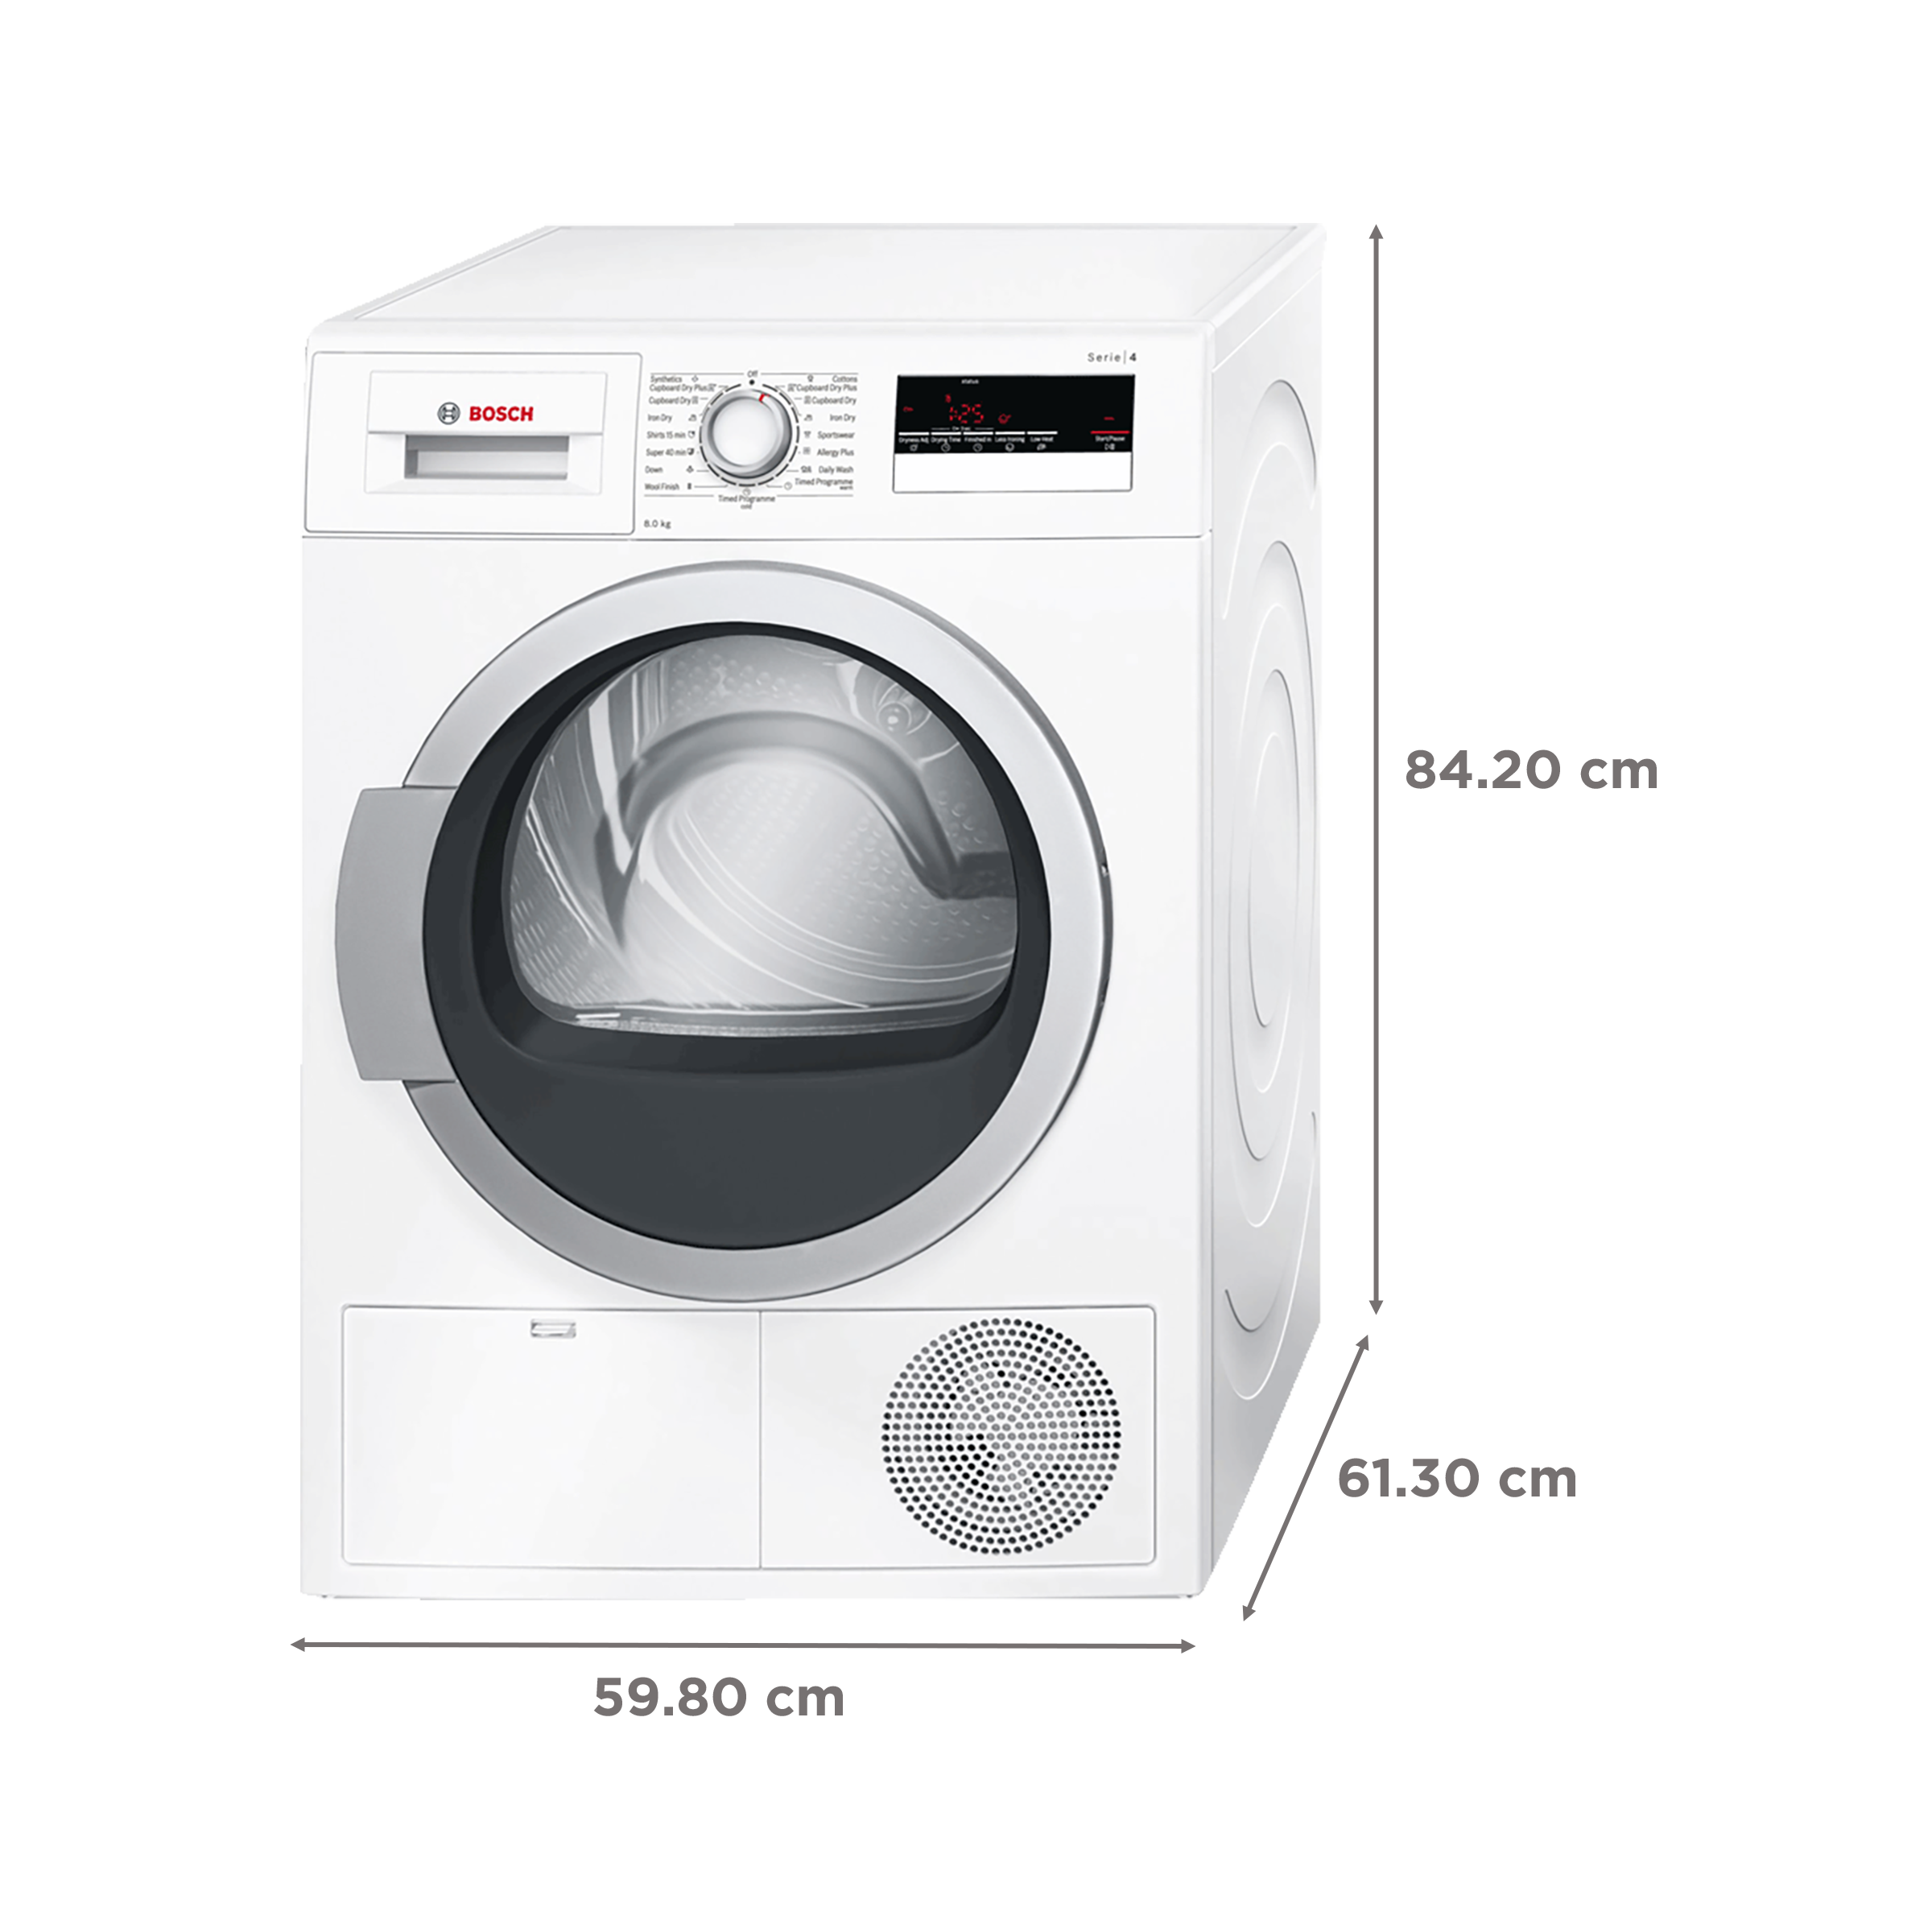 Bosch 8 kg Fully Automatic Front Load Dryer (Series 4, WTB86202IN, In-Built Heater, White)_3